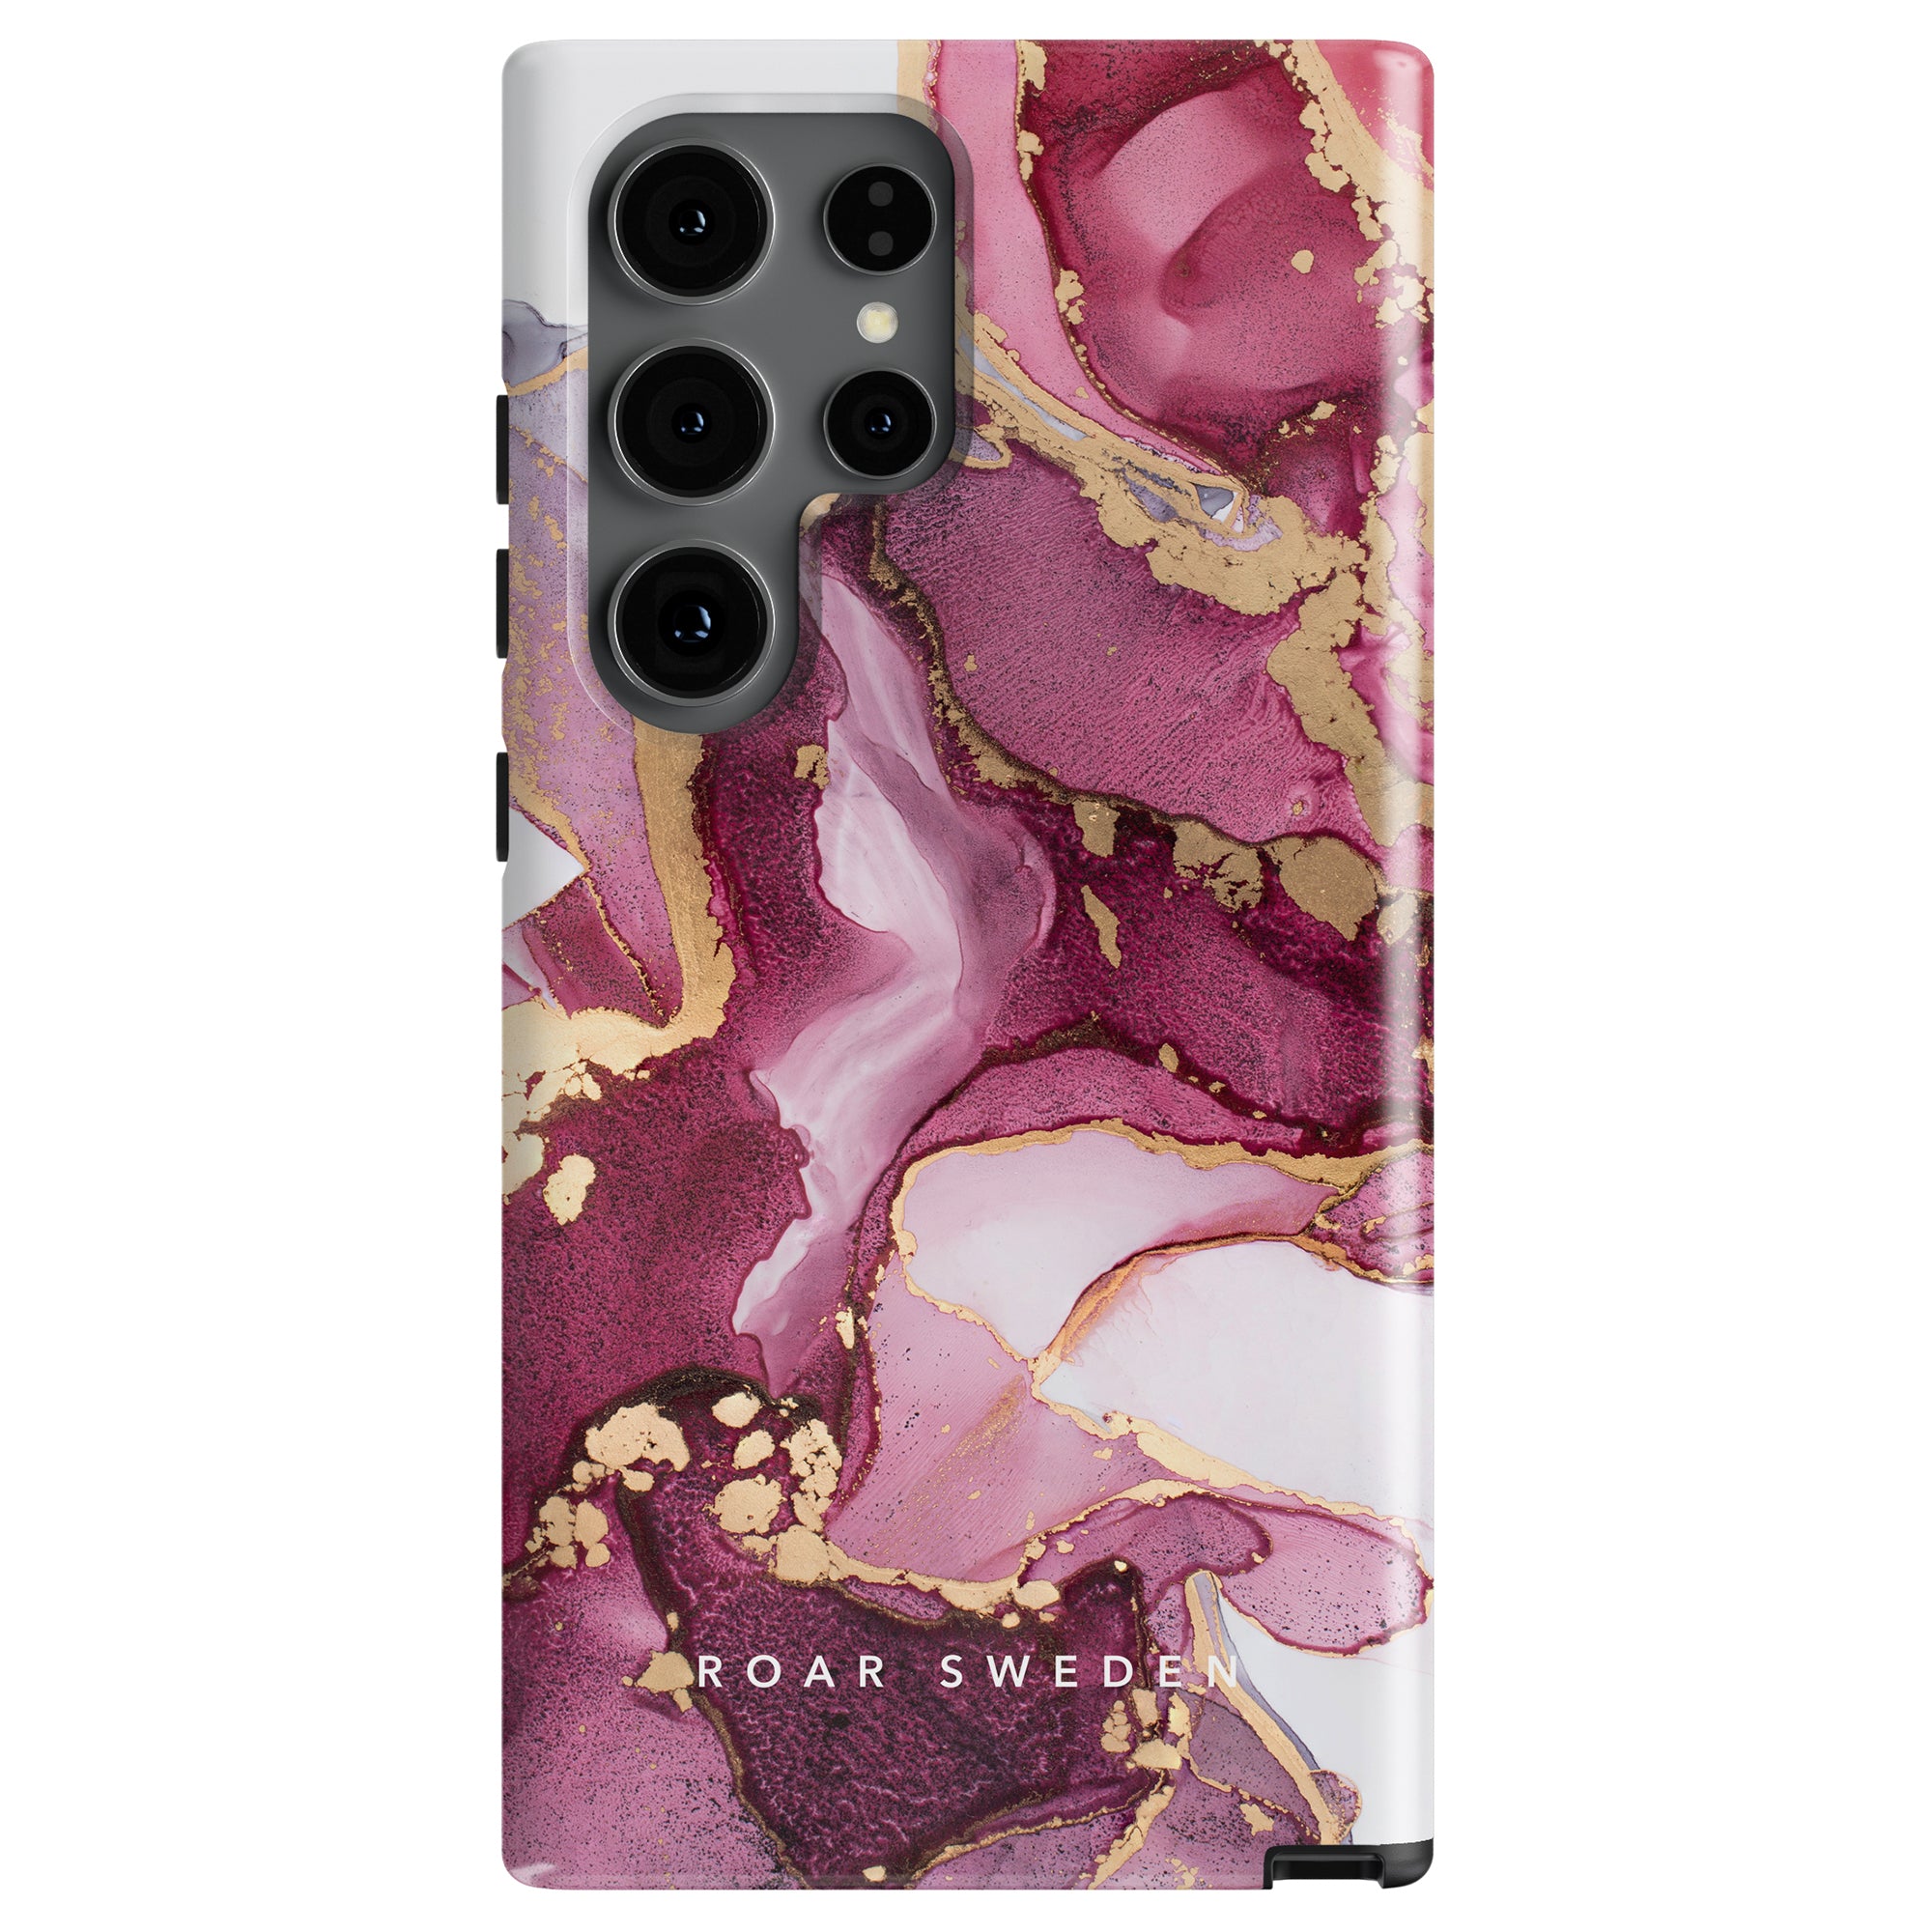 A premium mobilskal featuring a vibrant marbled design in shades of pink, purple, and gold. This Levante - Tough Case is branded with "Roar Sweden" at the bottom.